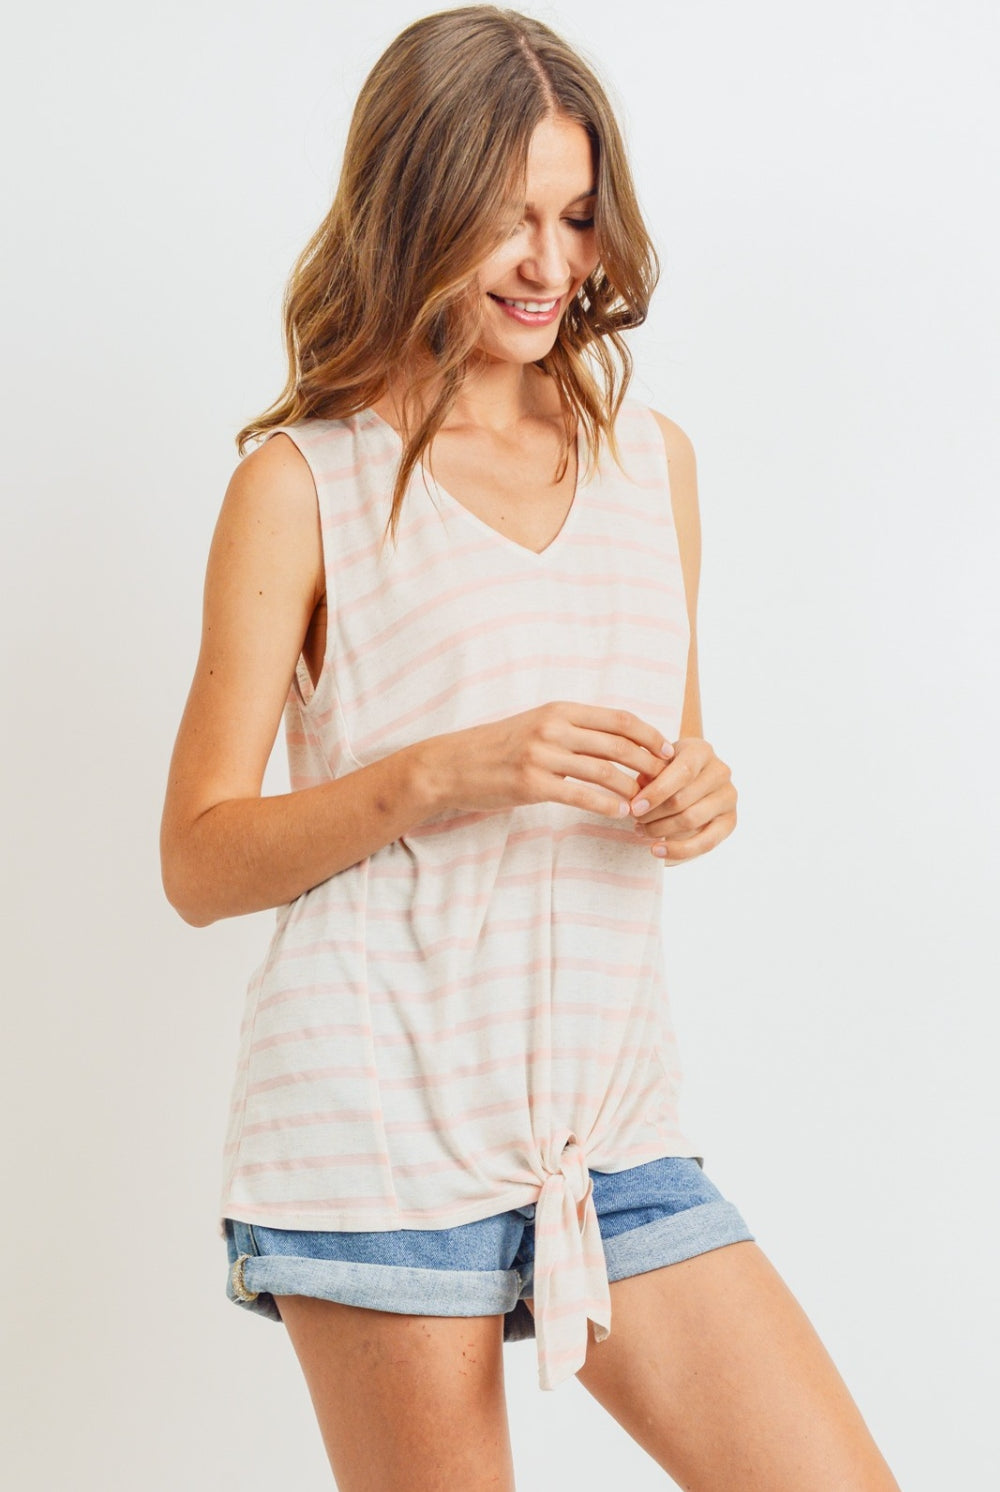 A woman in a coral and white striped sleeveless cotton top with a front tie detail, pairing it casually with denim shorts for a relaxed and stylish summer look.